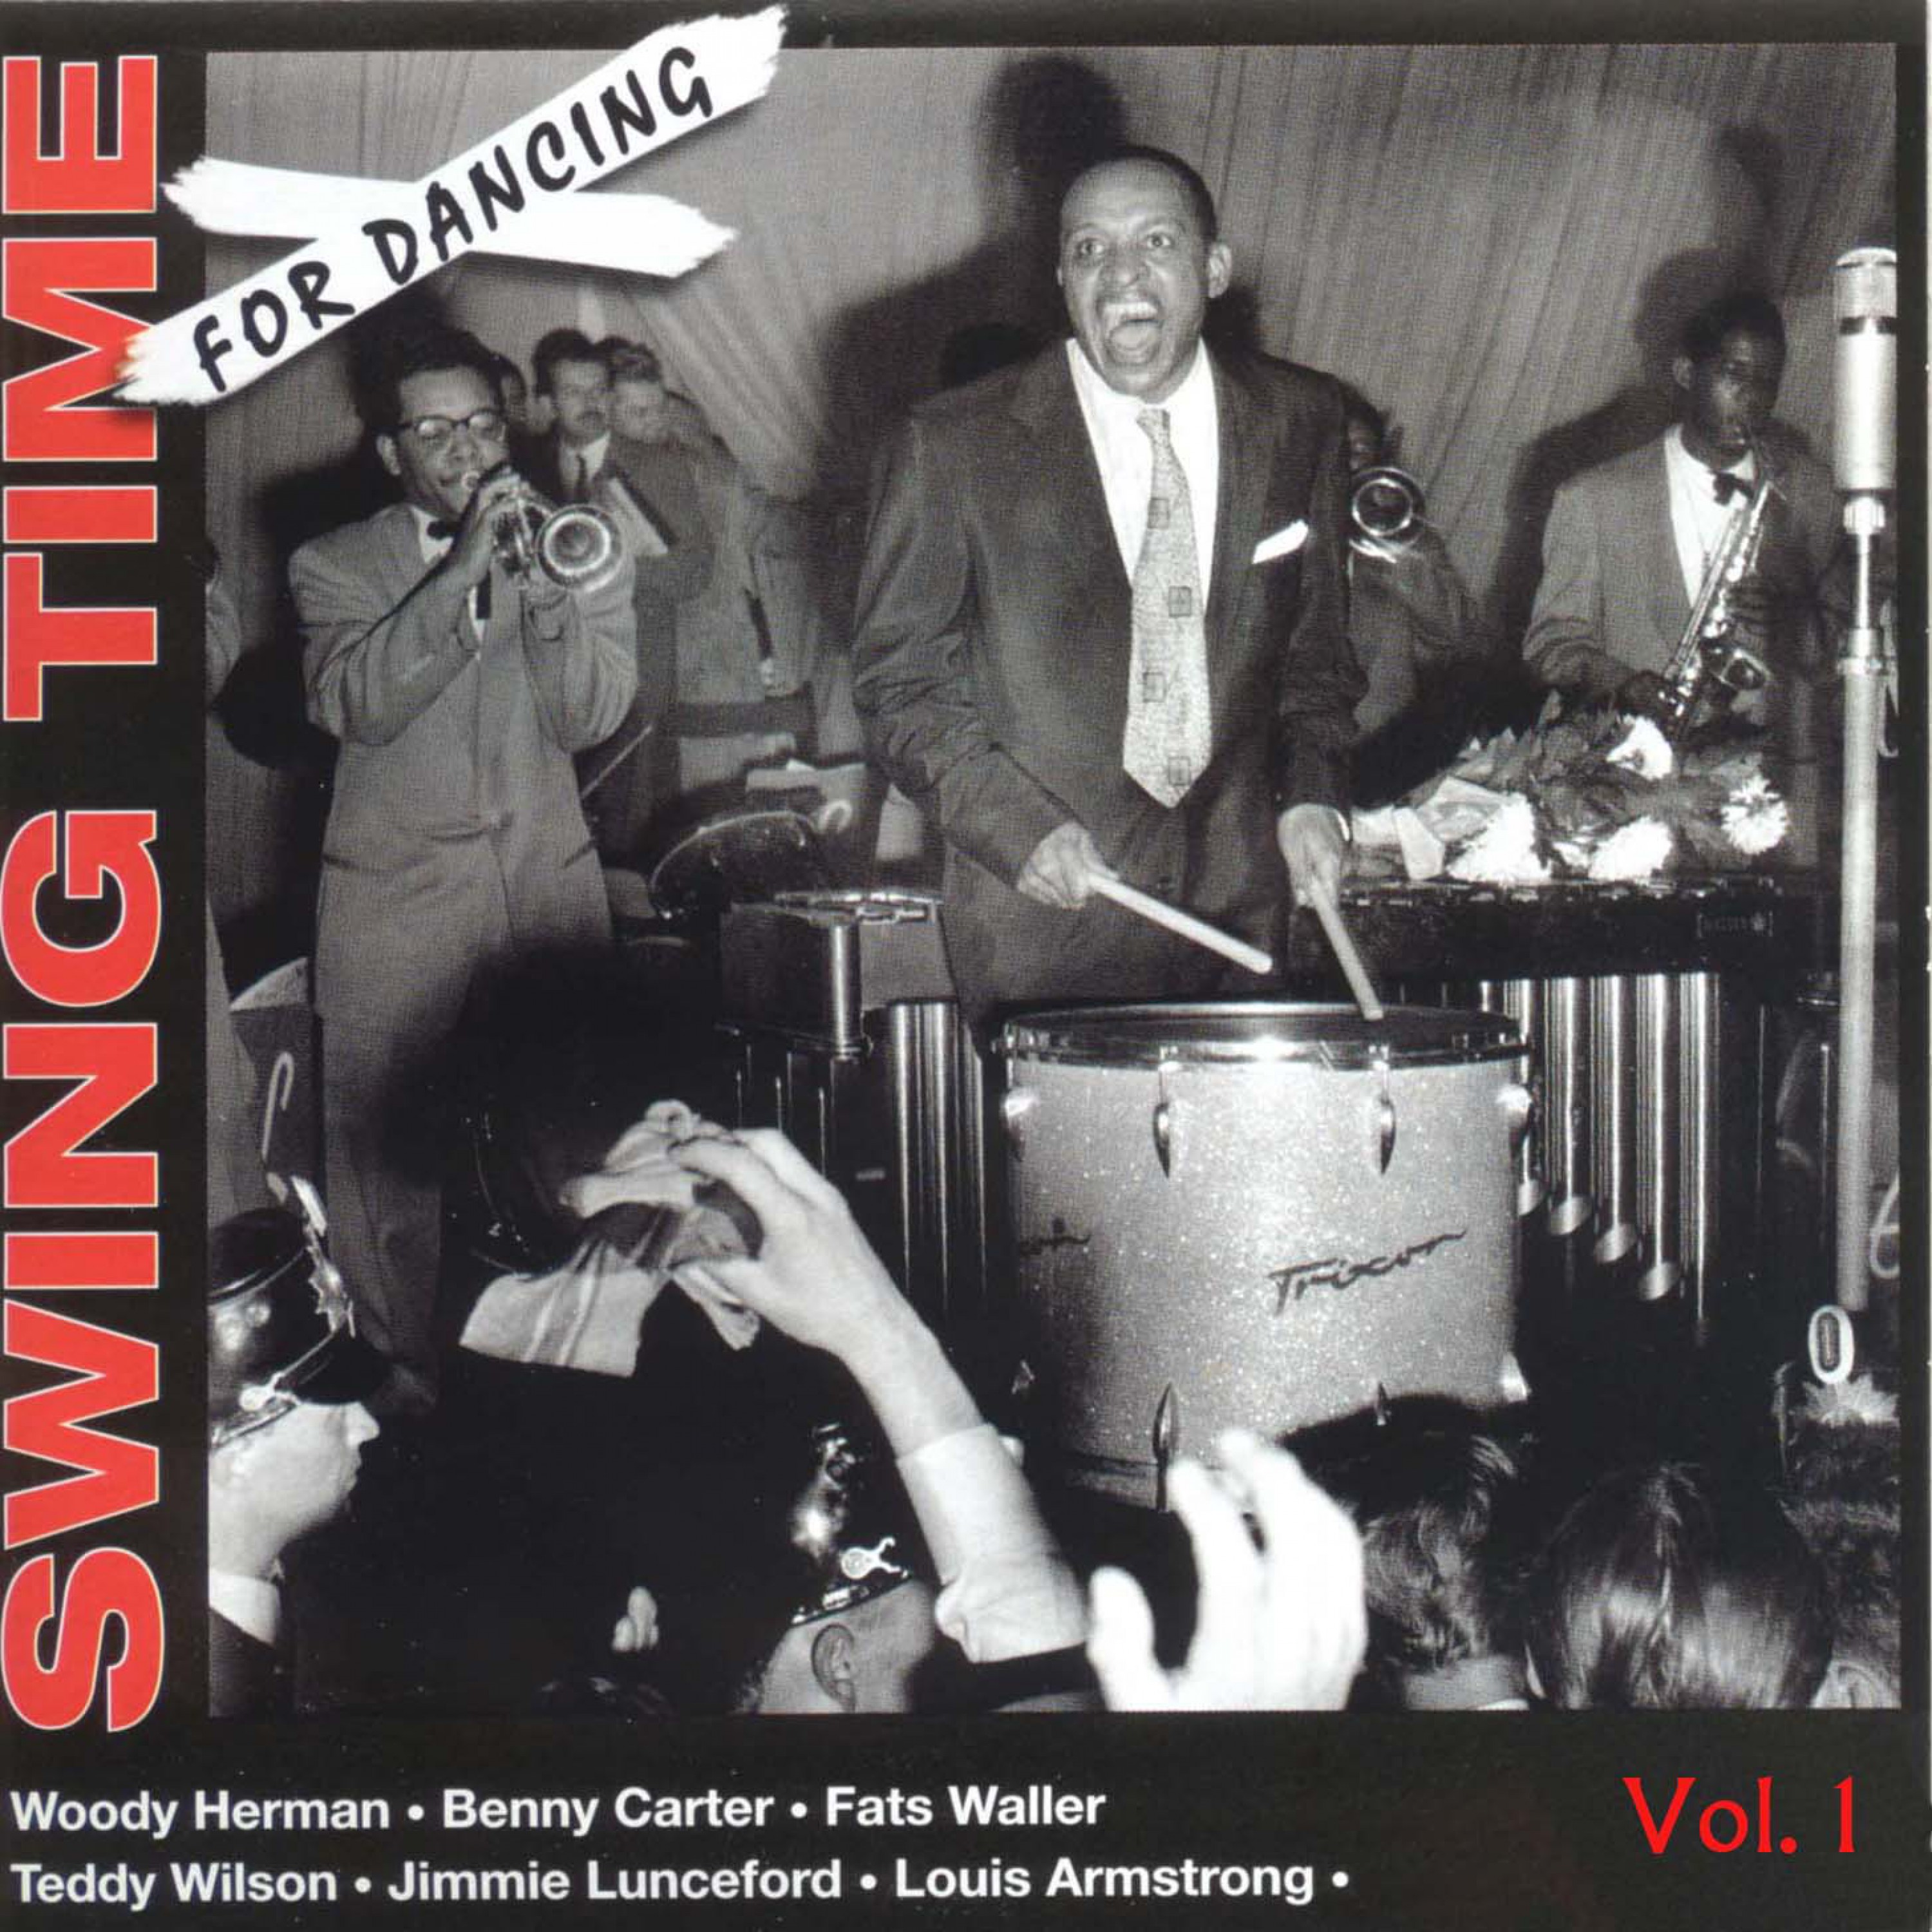 Swing Time for Dancing Vol. 1